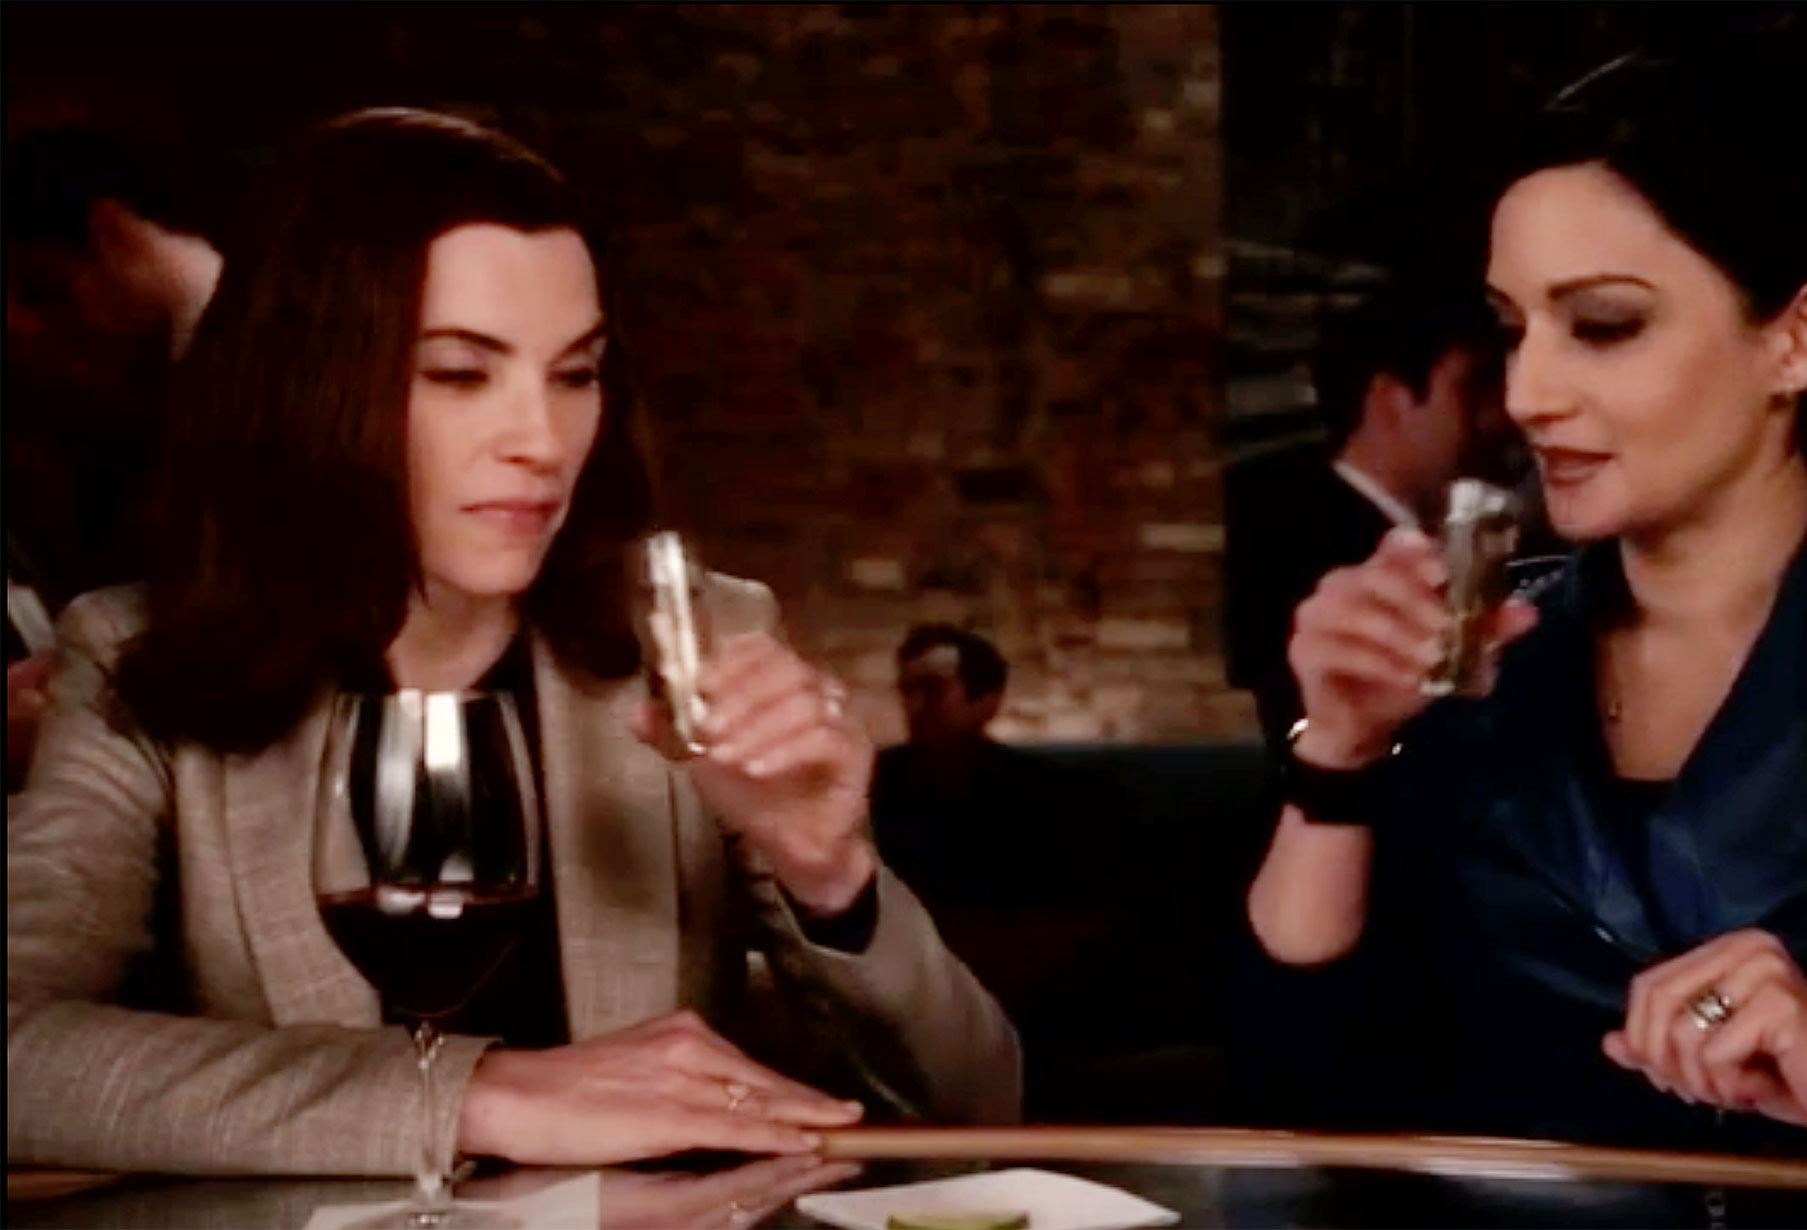 Archie Panjabi Reacts to Good Wife Bar Scene With Julianna Margulies pic